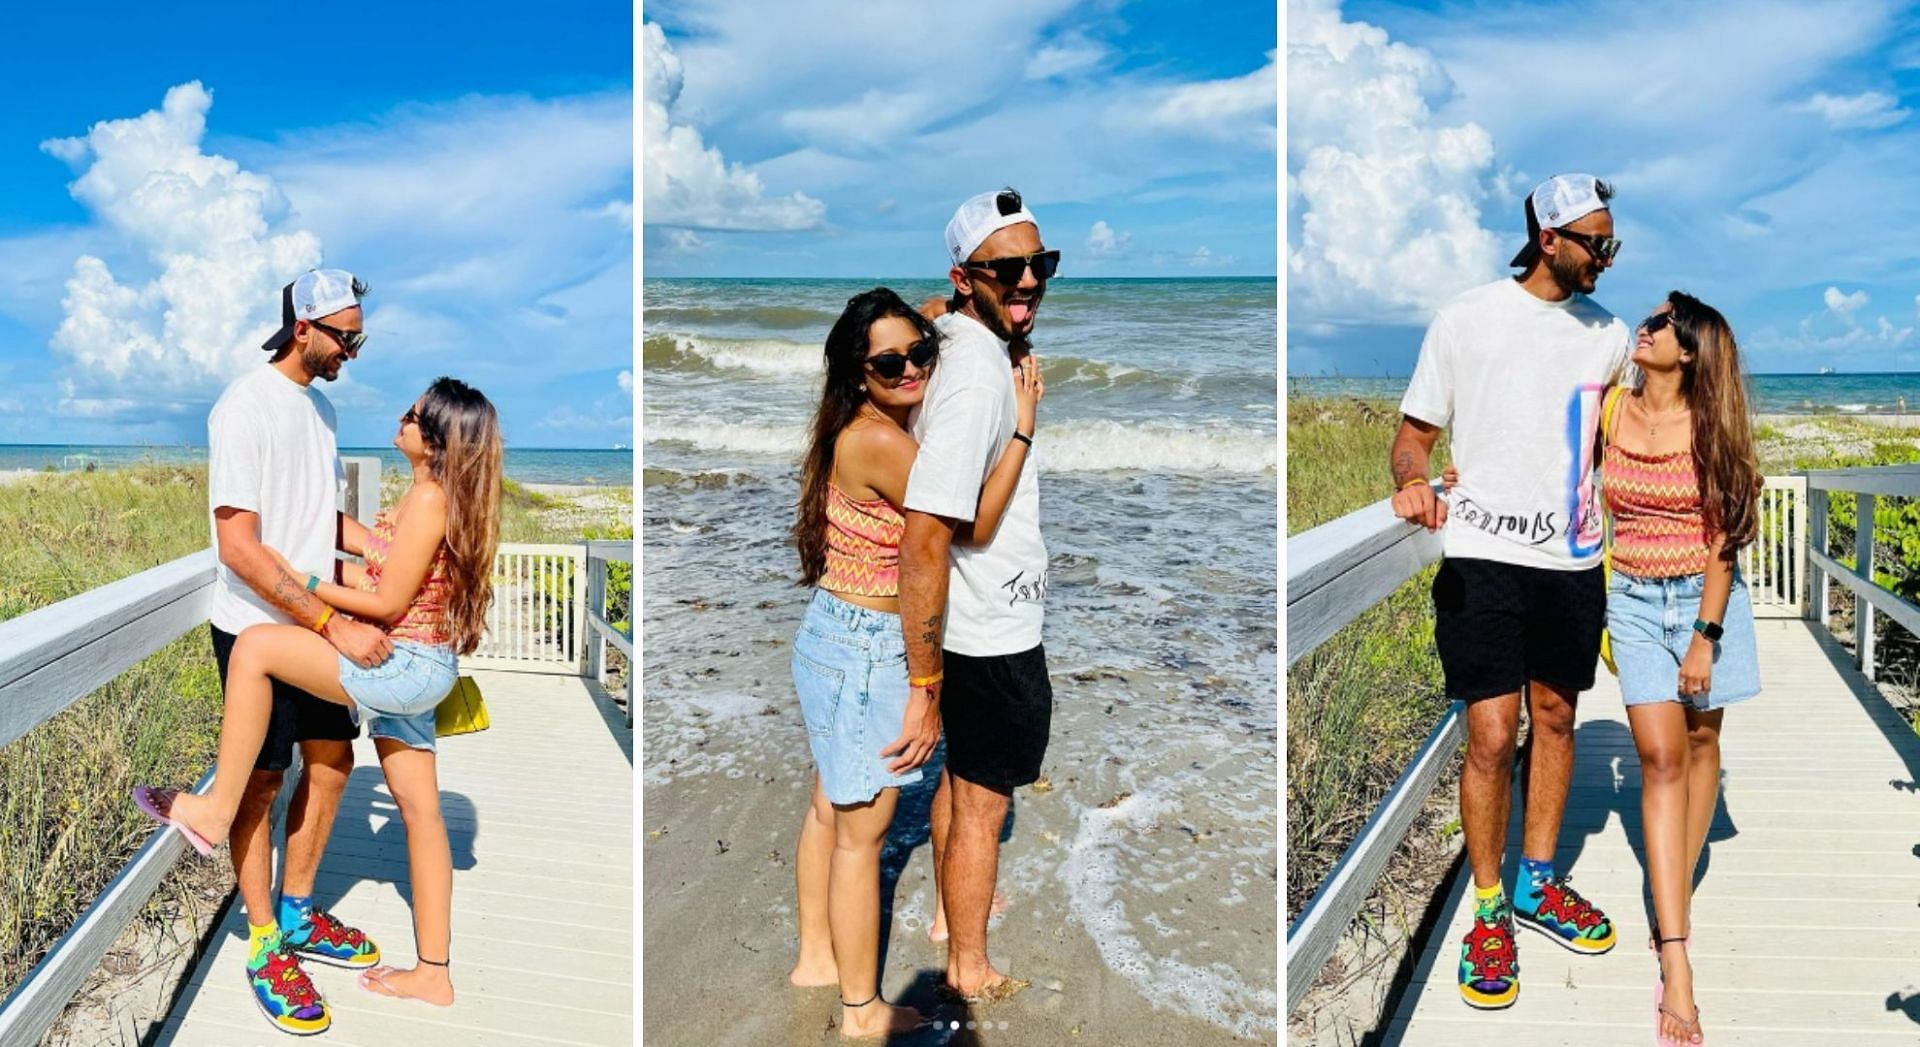 Axar Patel gets romantic with fiancée Meha